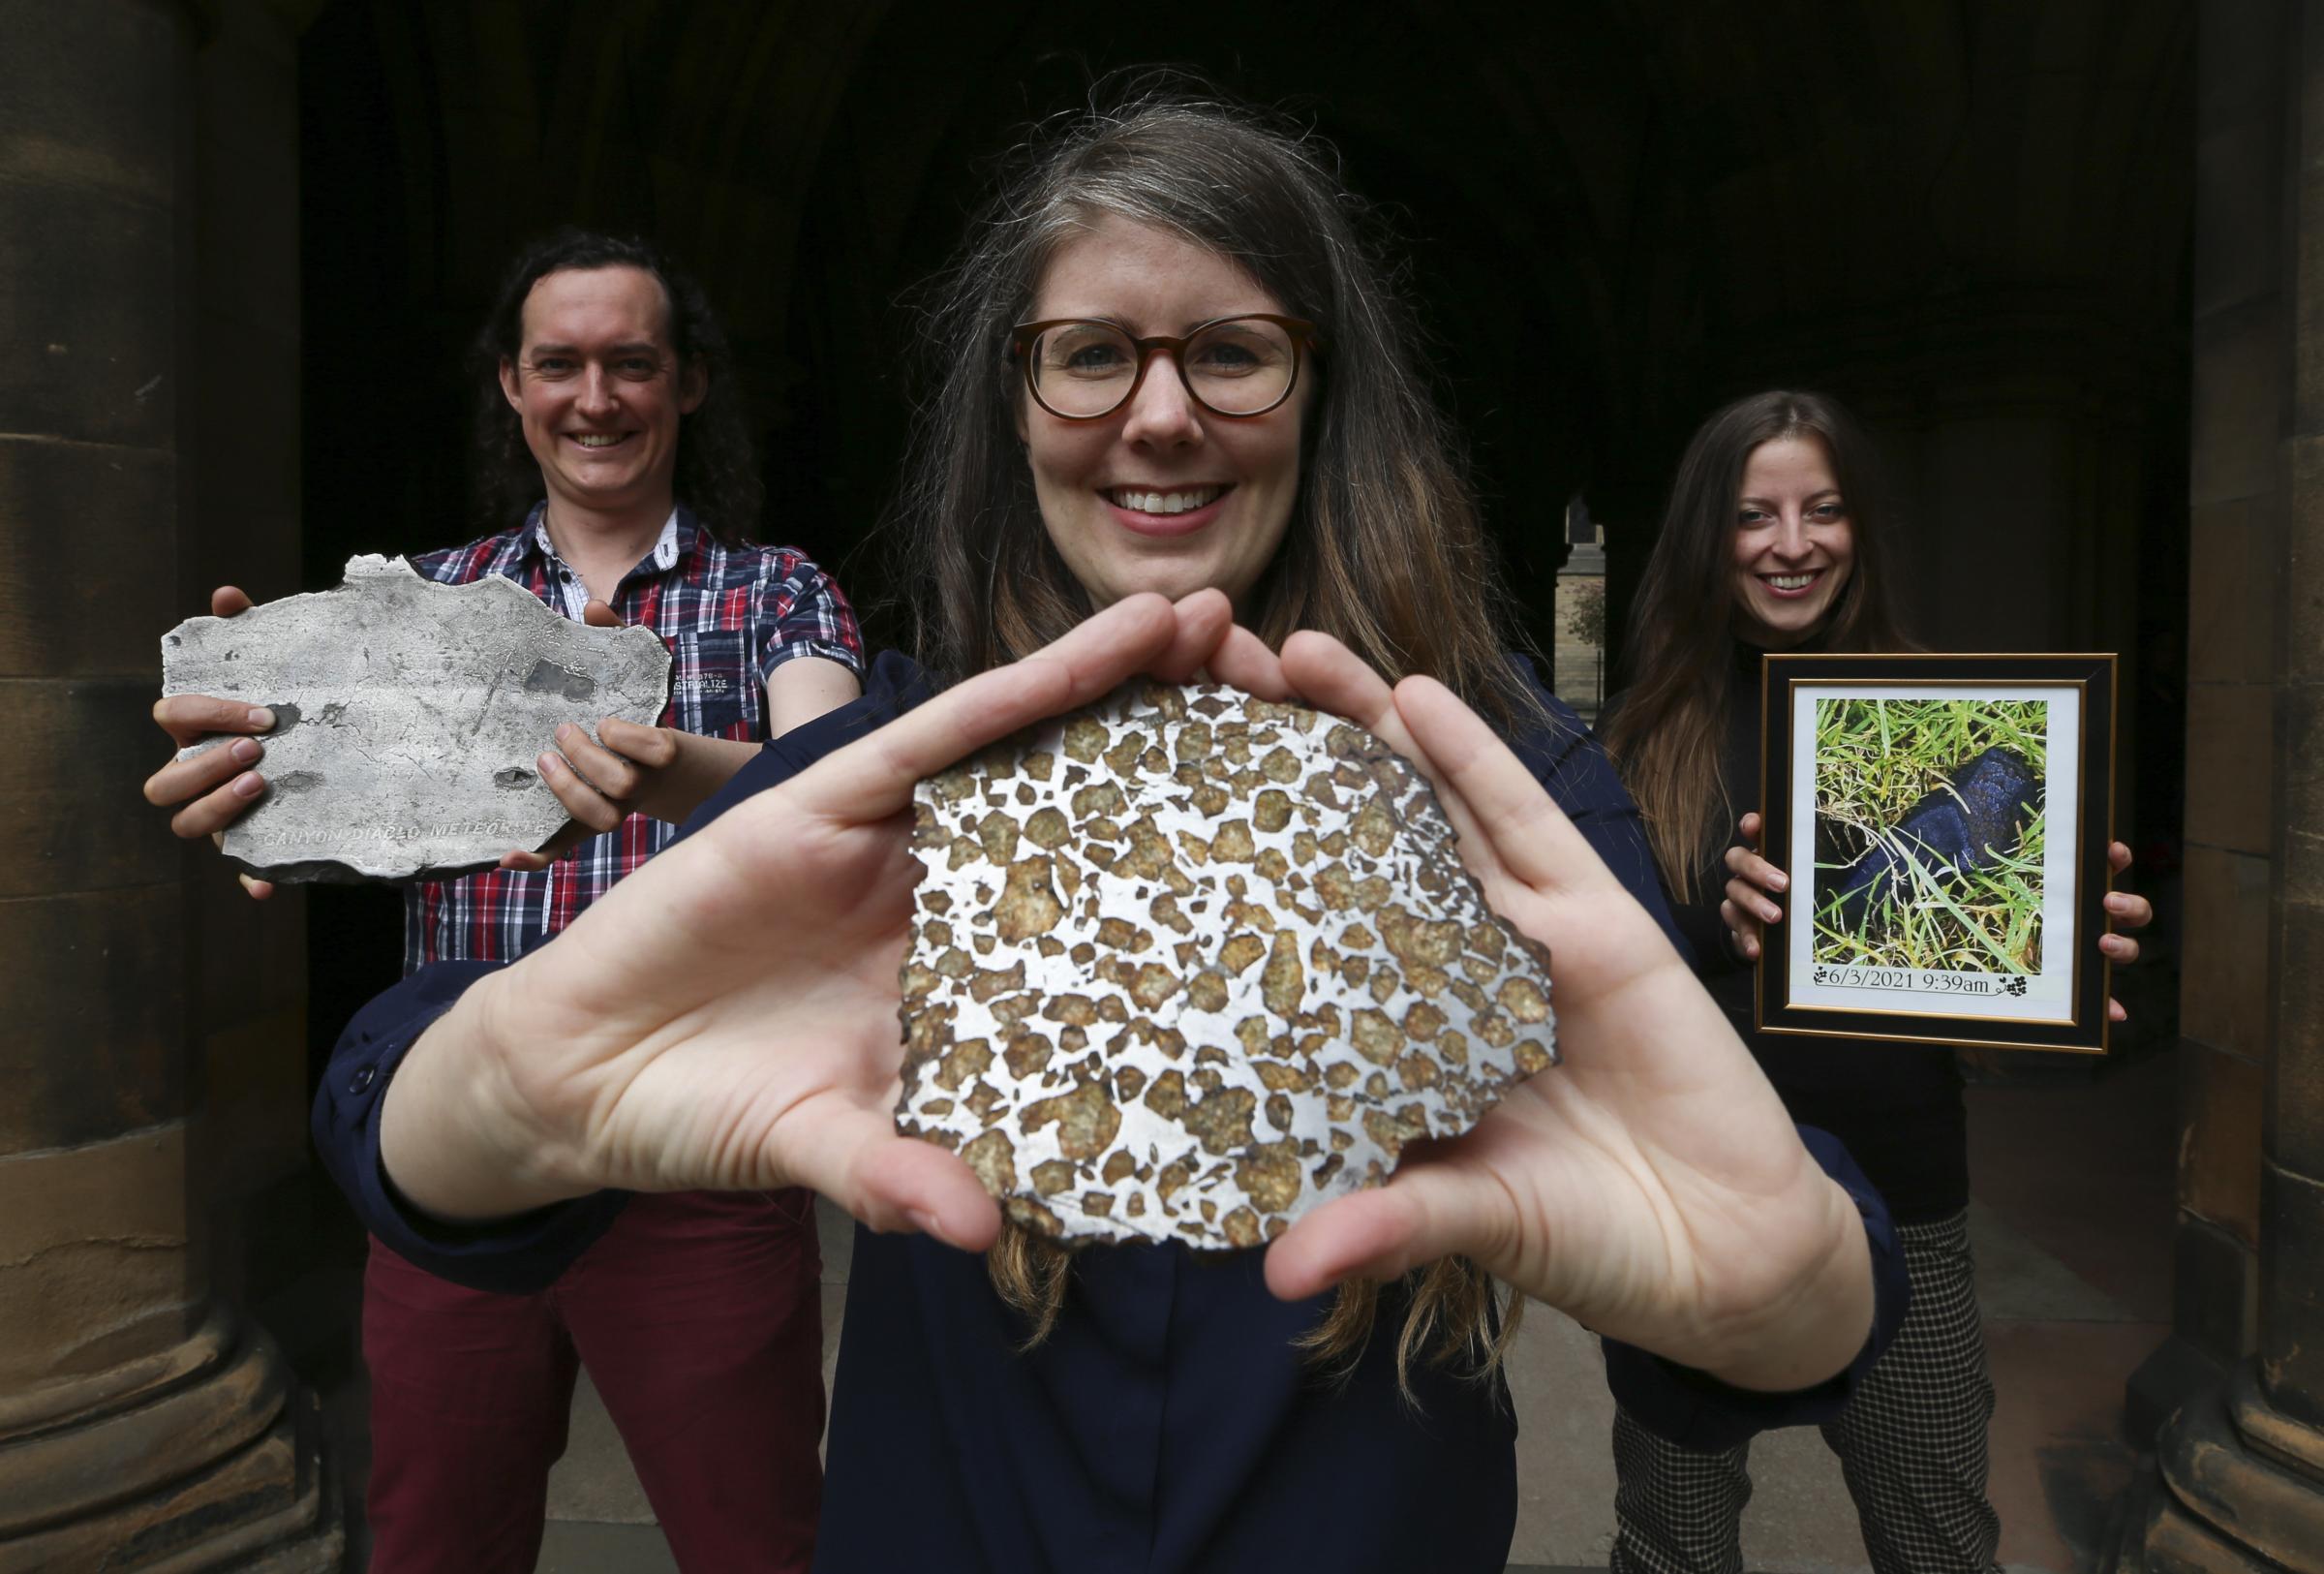 Glasgow University researcher Luke Daly with partner Mire Ihasz and scientist Aine OBrien hold meteorites from the Hunterian Museum Picture: Gordon Terris